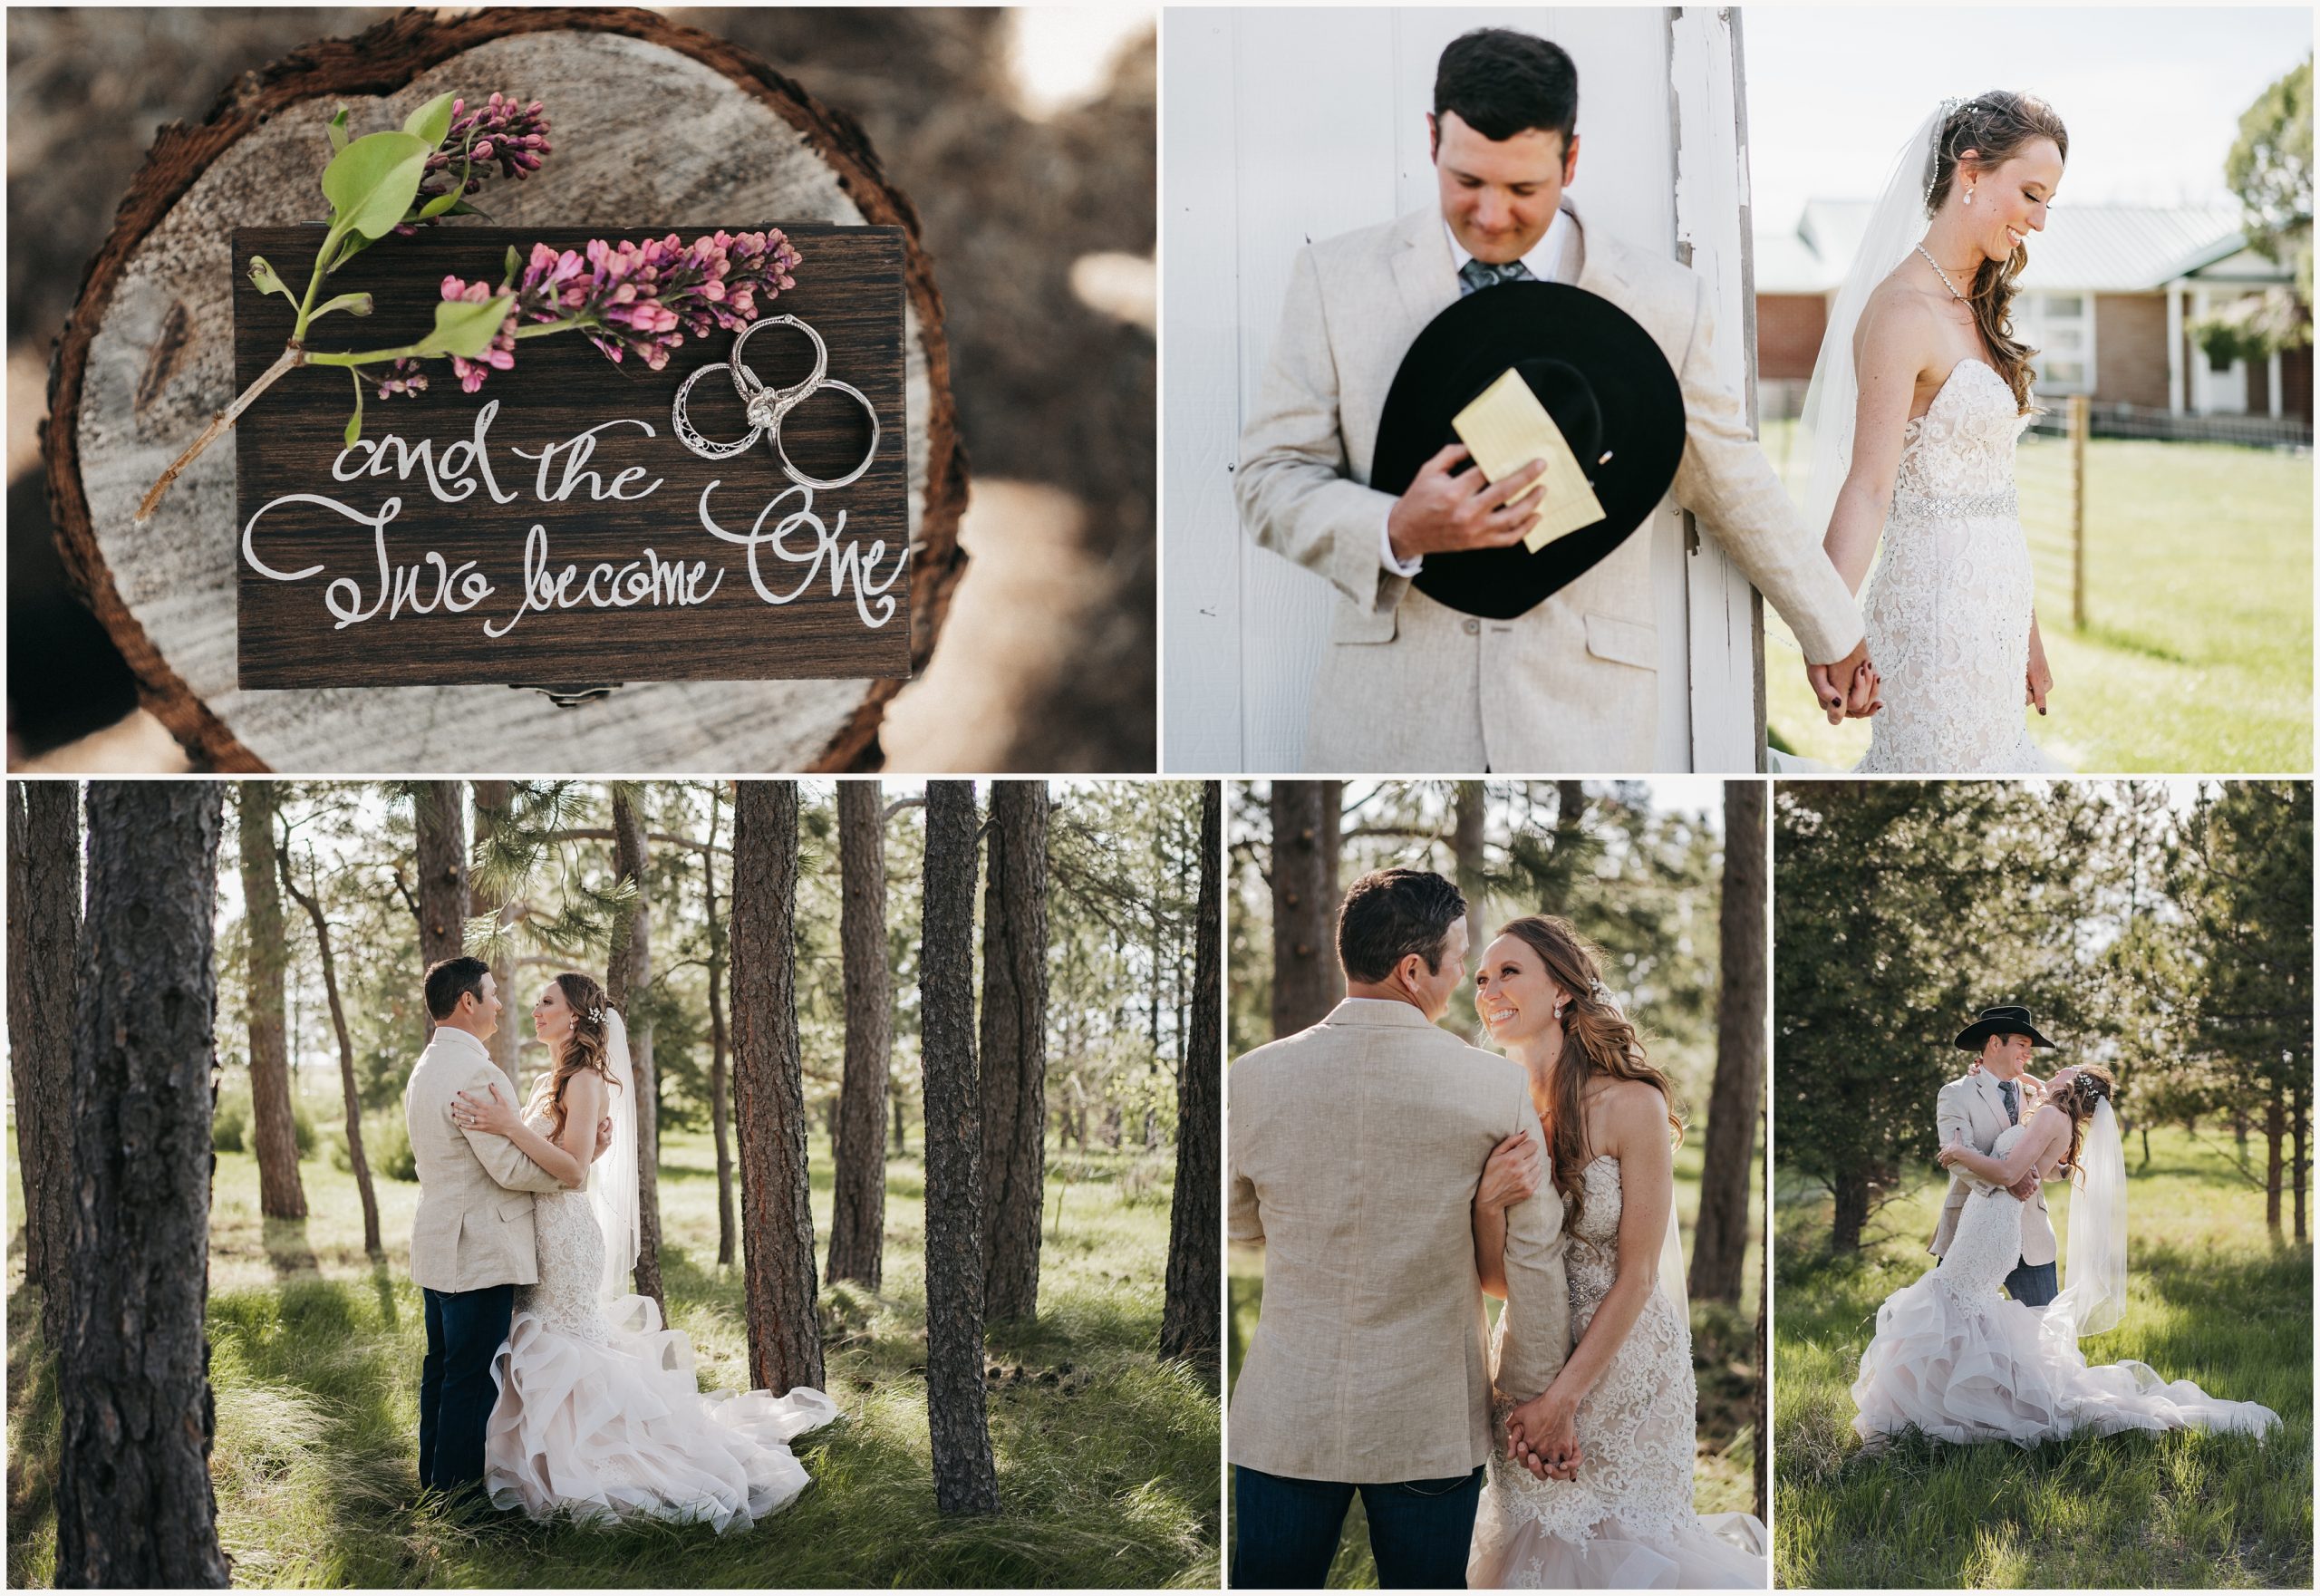 When to elope in Colorado, Best Month to Have an Outdoor Wedding in Colorado, Colorado Elopement Inspiration, Winter Colorado Elopement, Spring Colorado Elopement, Summer Colorado Elopement, Fall Colorado Elopement, best month to elope in Colorado, the best time to elope in Colorado, summer elopement